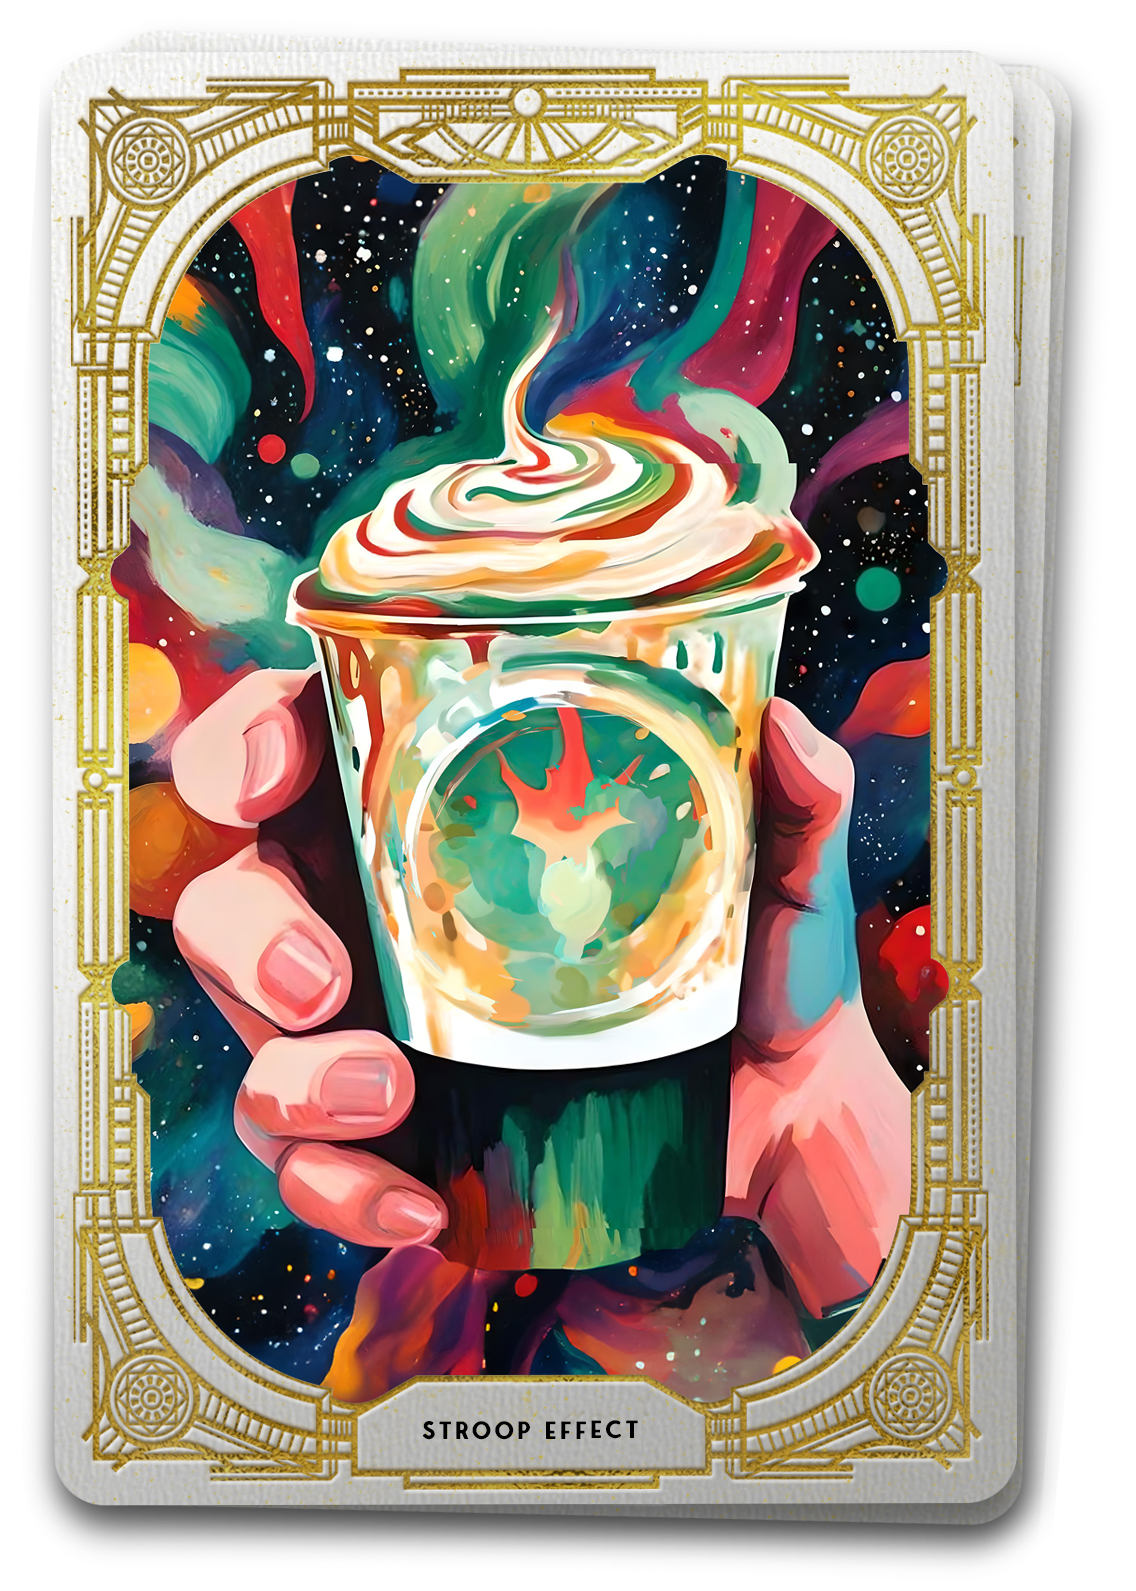 A tarot card with the image of a hand holding a vibrant, swirling cup of coffee against a cosmic backdrop, symbolizing the interplay of colors and unexpected perceptions, inspired by the Stroop Effect in UX design.